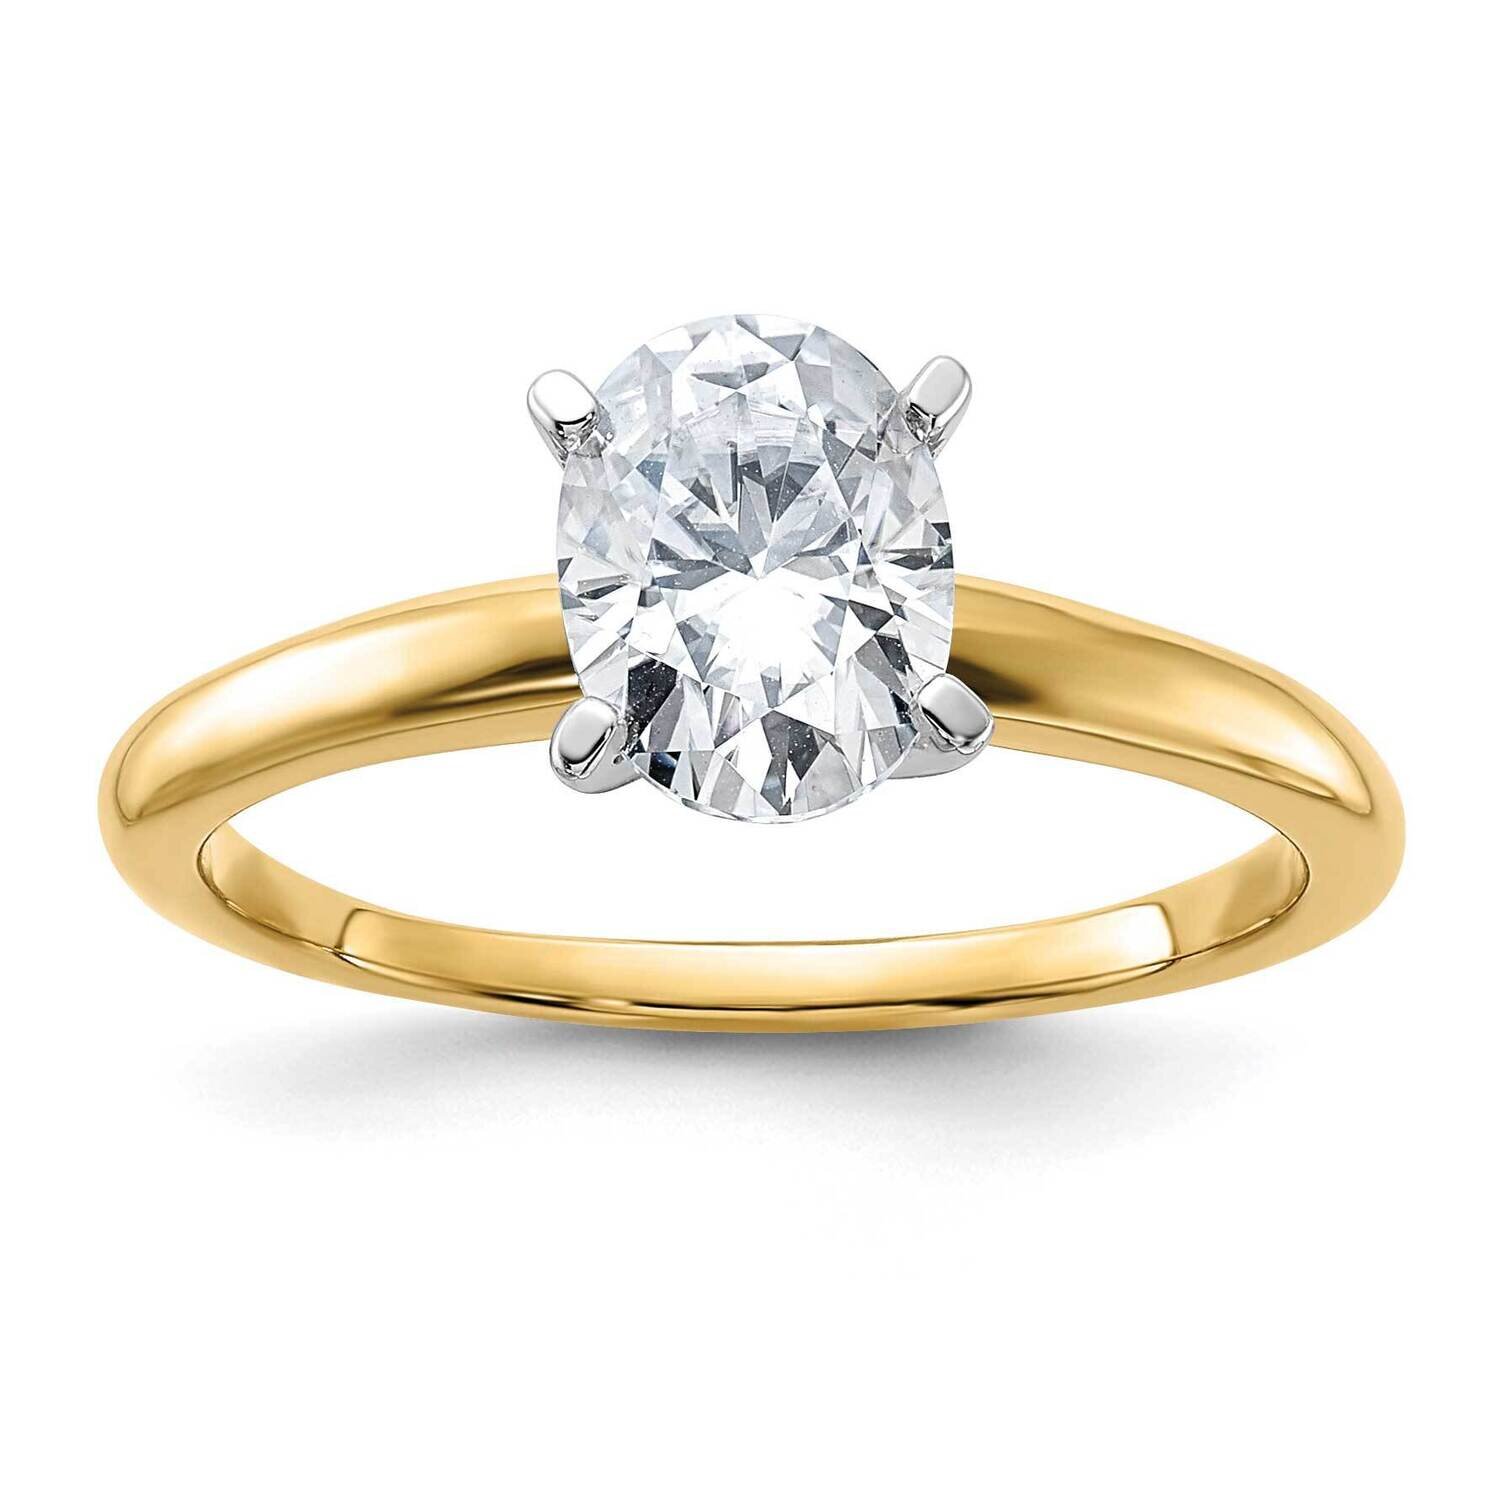 1 1/2ct. G H I True Light Oval Moissanite Solitaire Ring 14k Two Tone Gold RM5965O-125-8MT